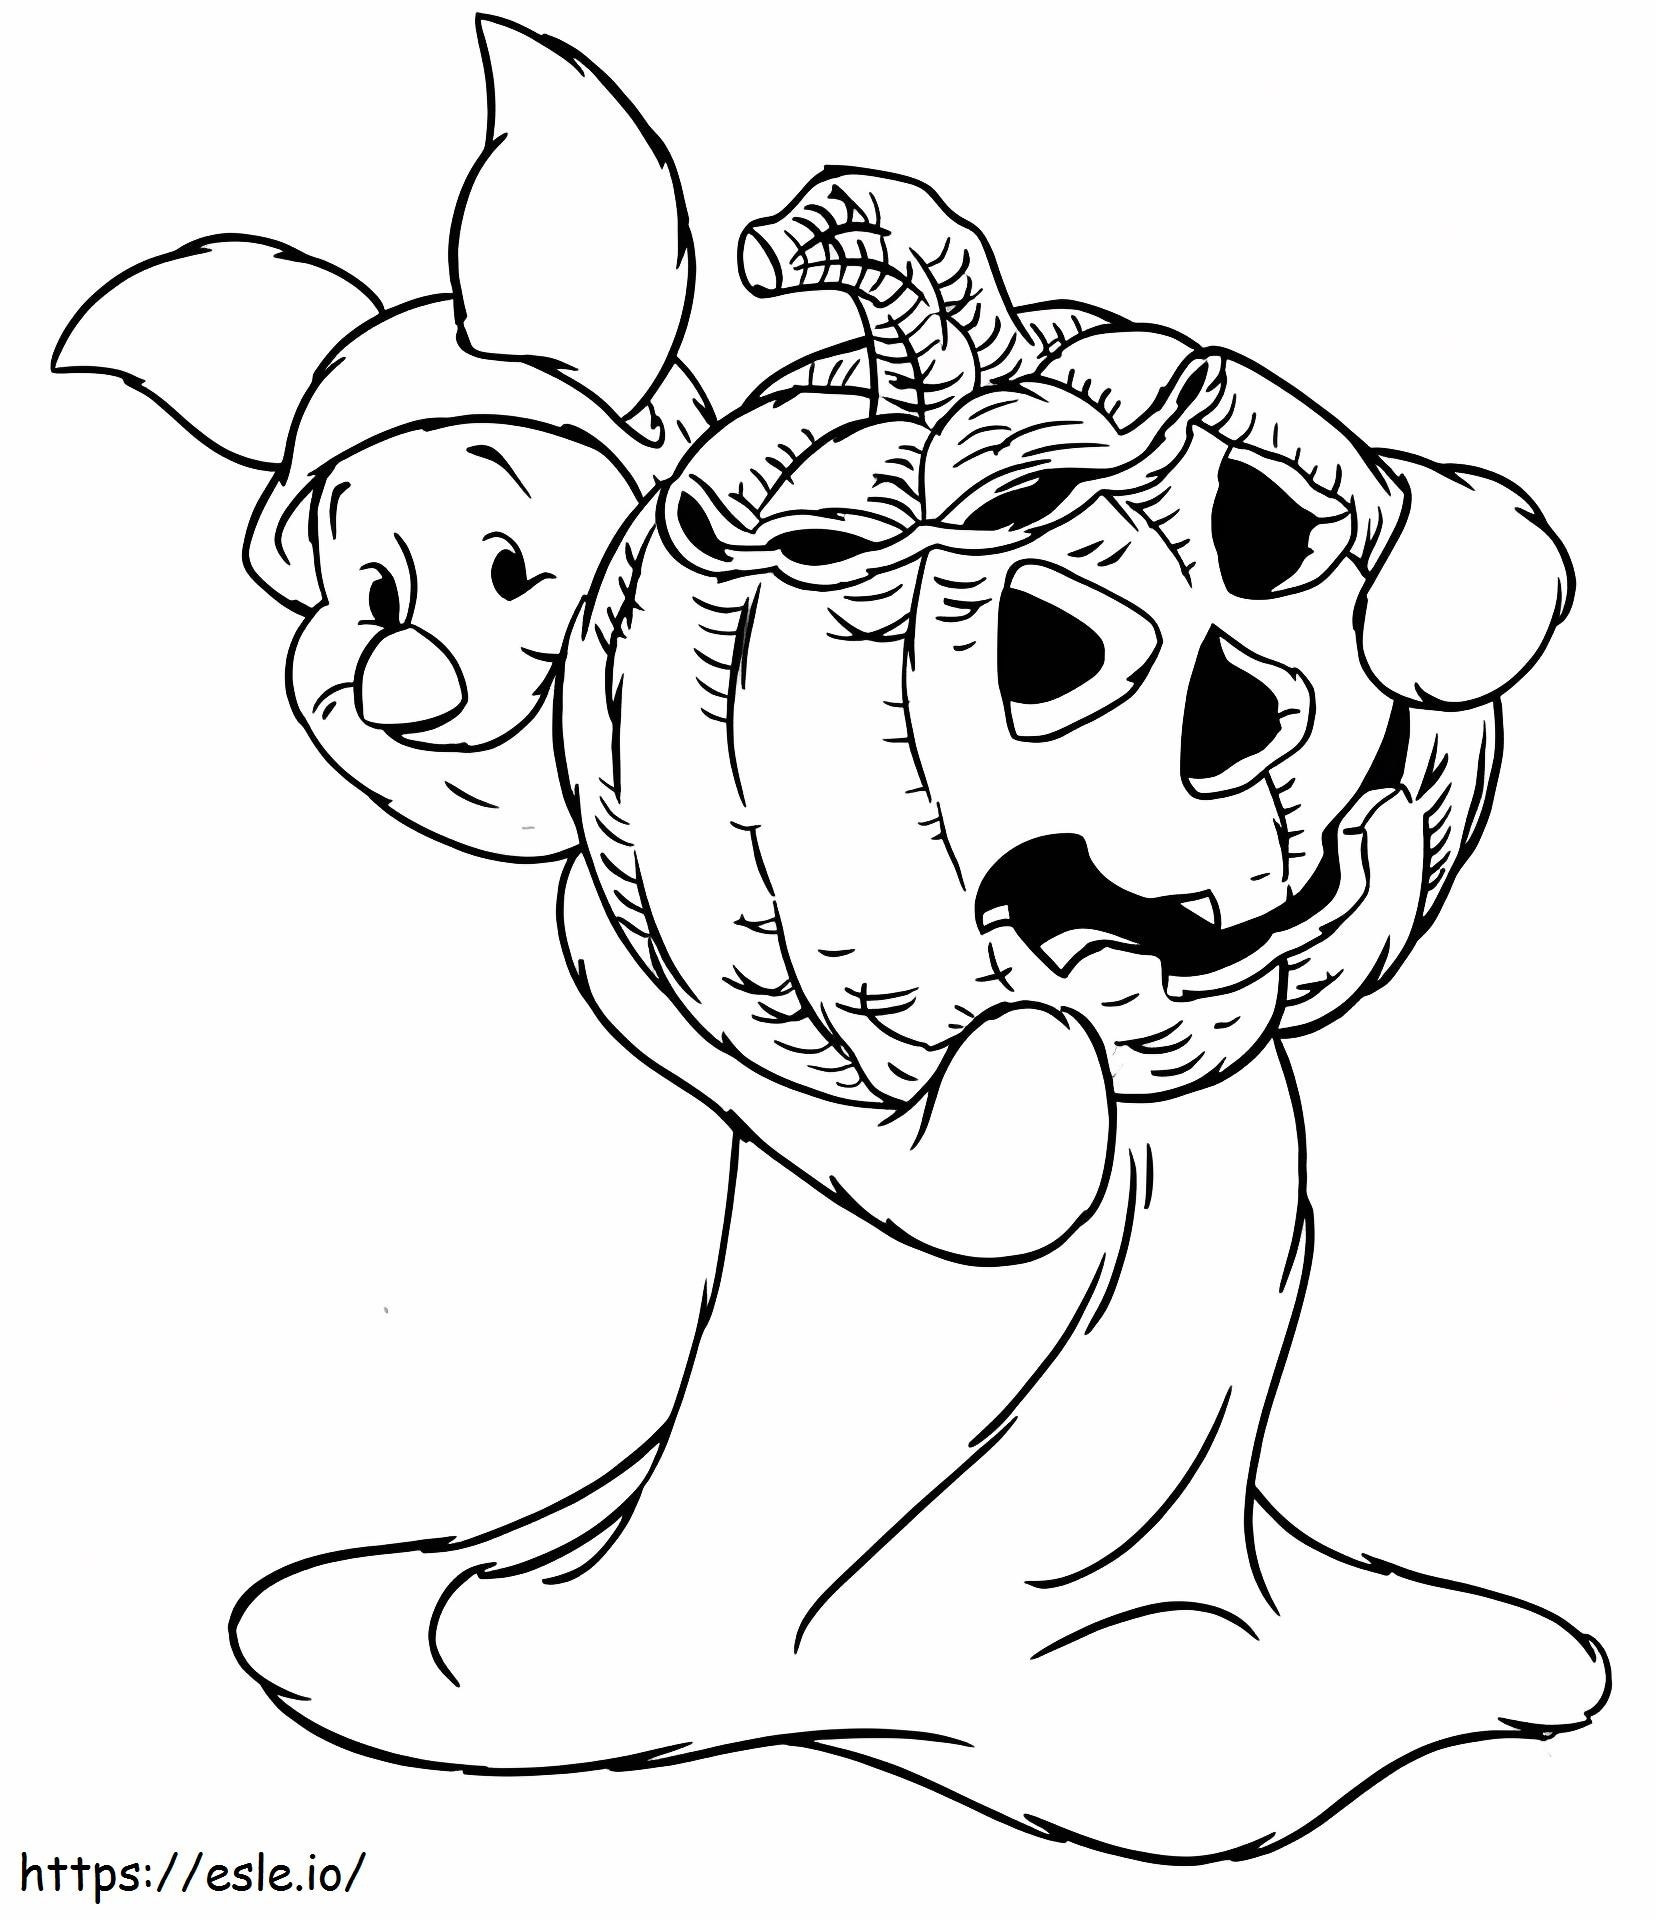 1532919741 Piglet Holding Halloween Pumpkin A4 coloring page